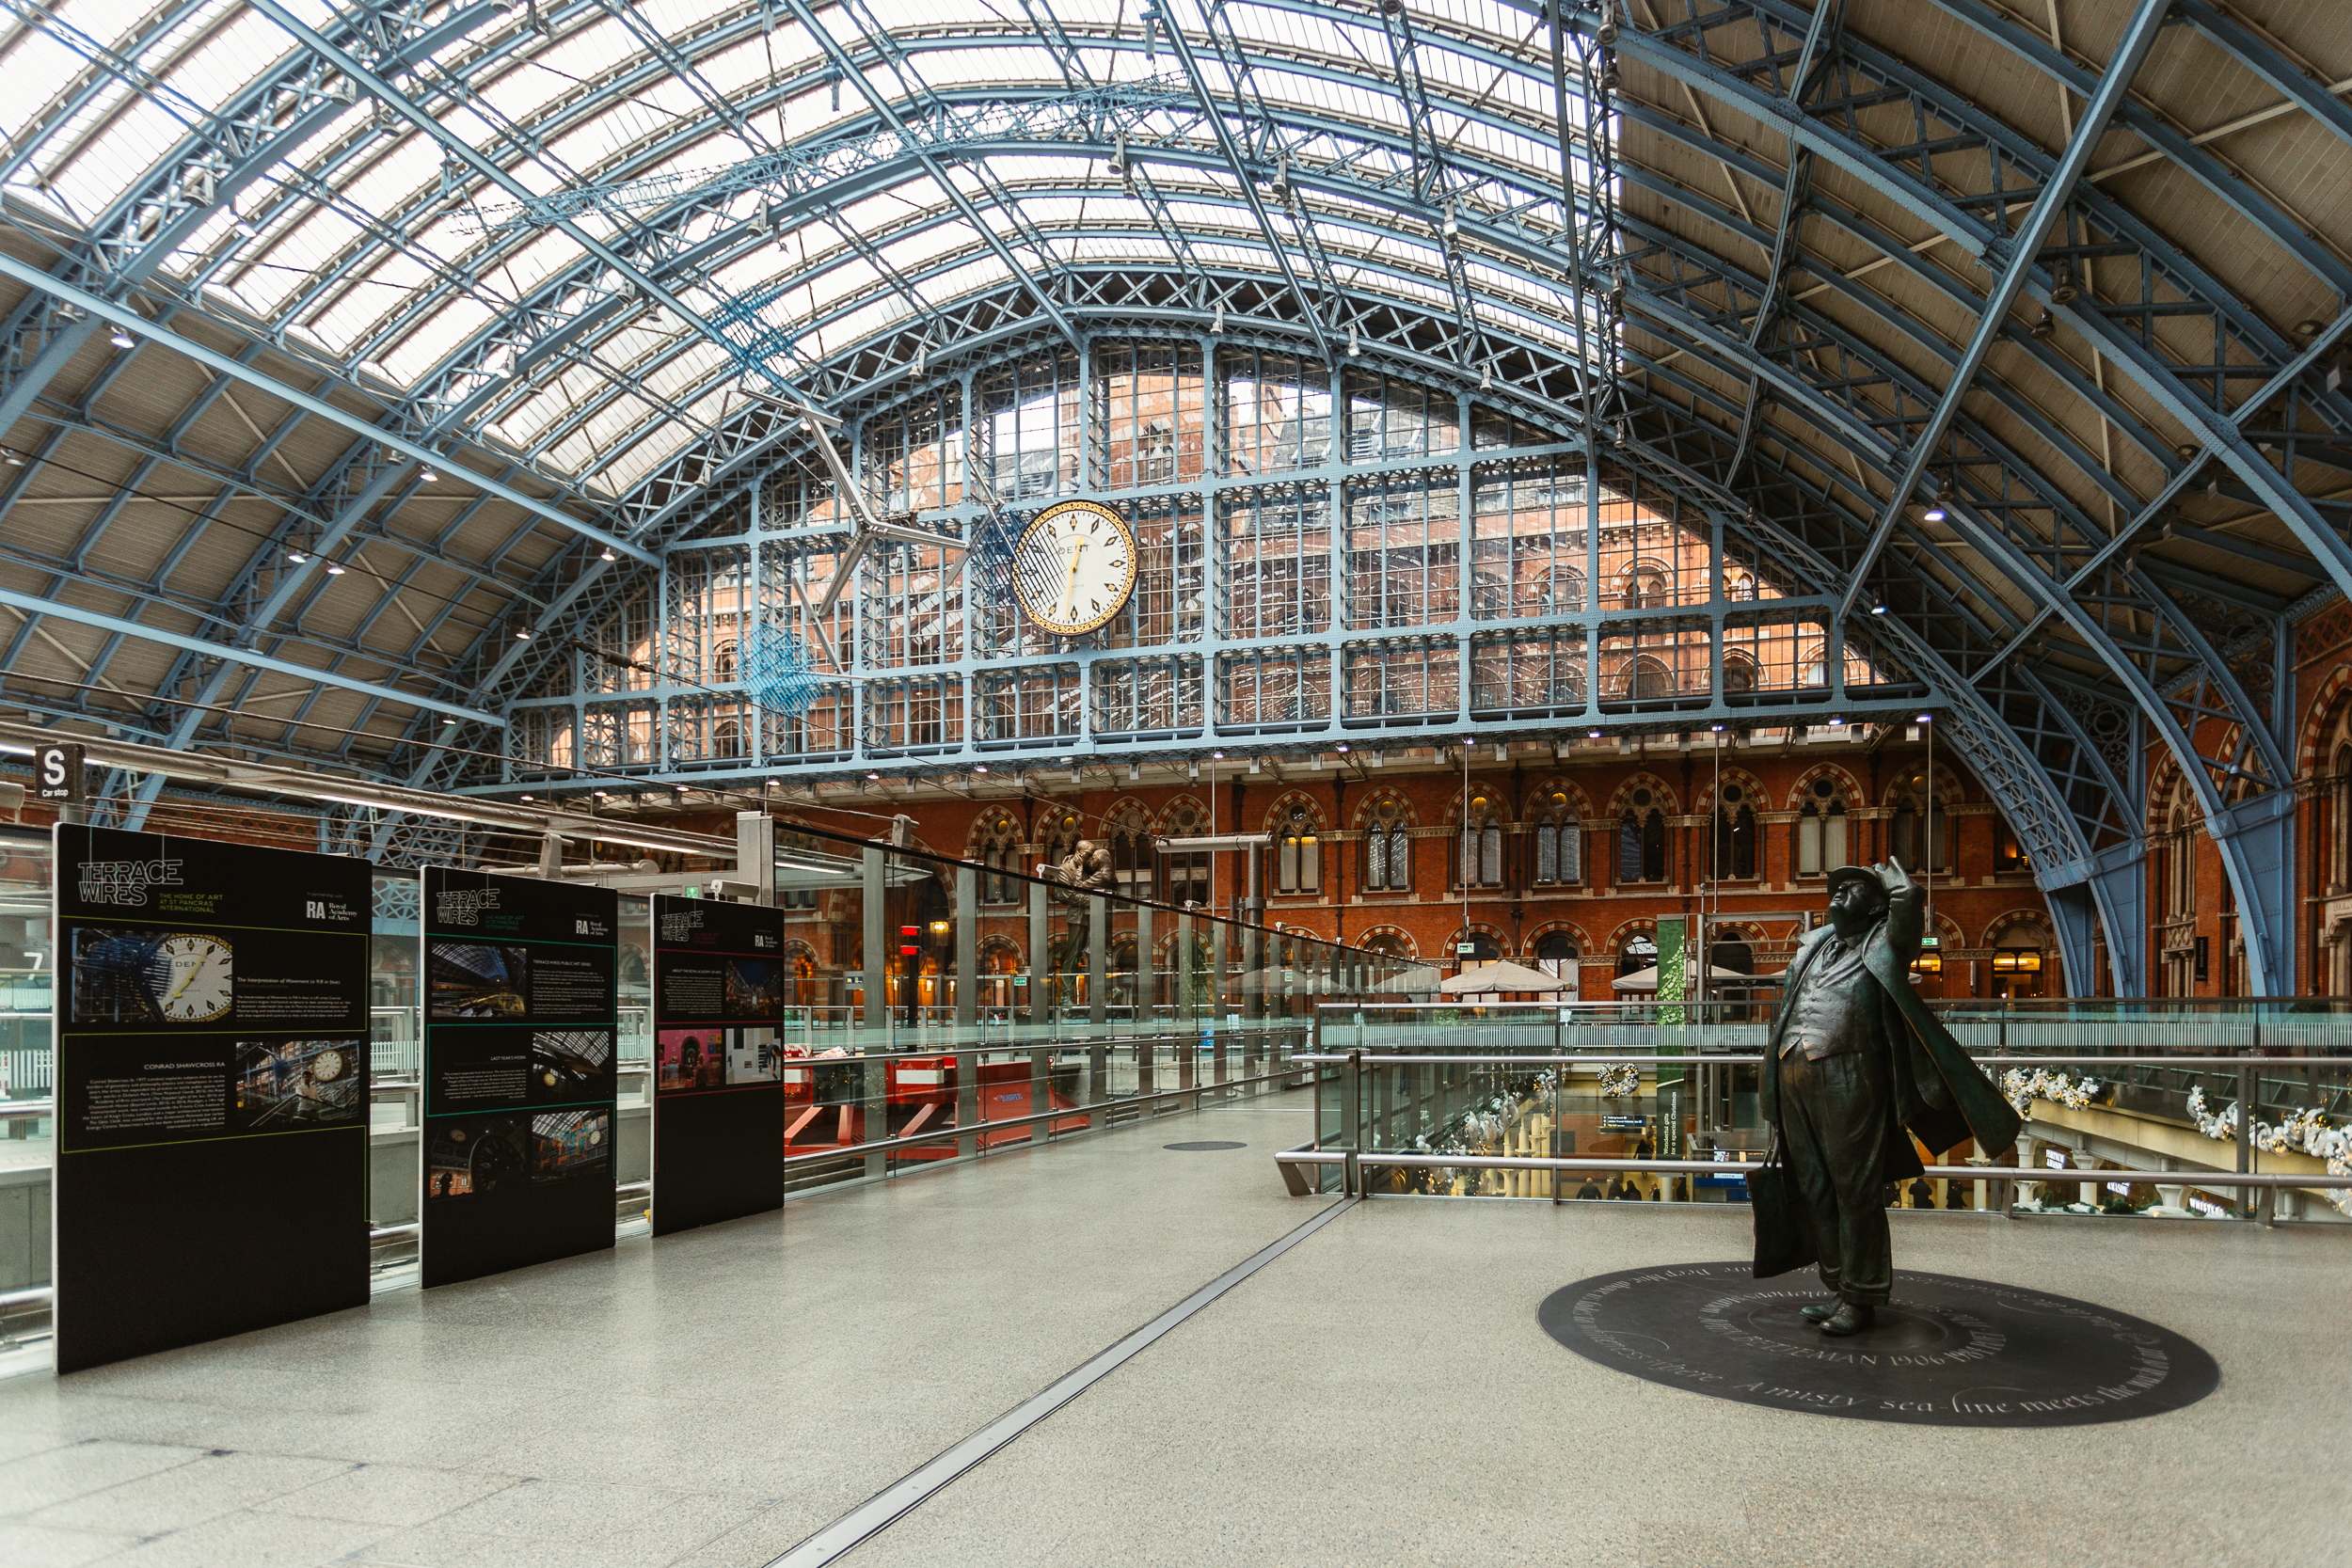 LBIC is conveniently located within 10 minutes of St Pancras international station